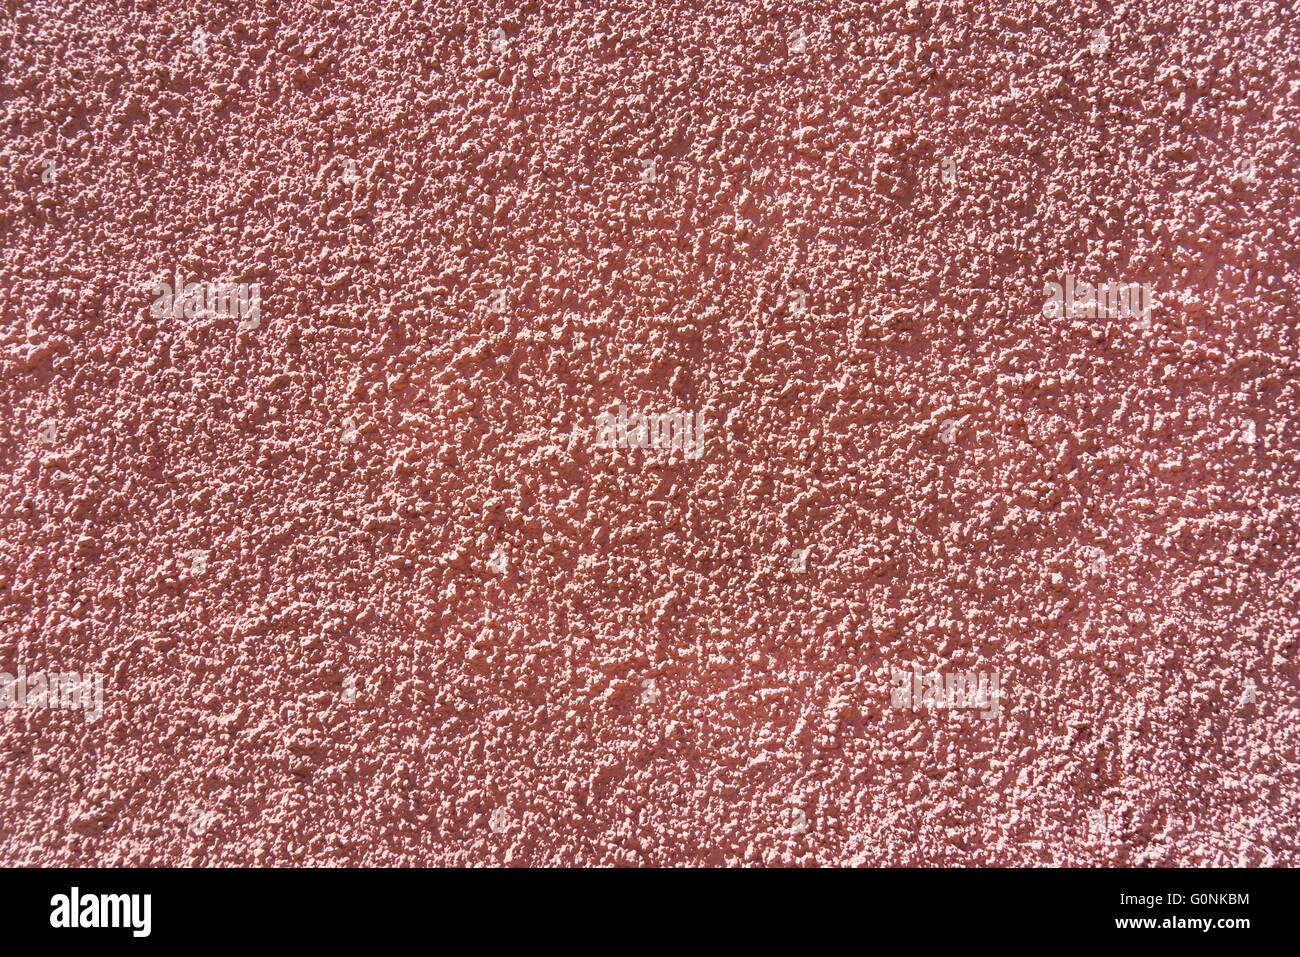 Very rough pink plaster Stock Photo